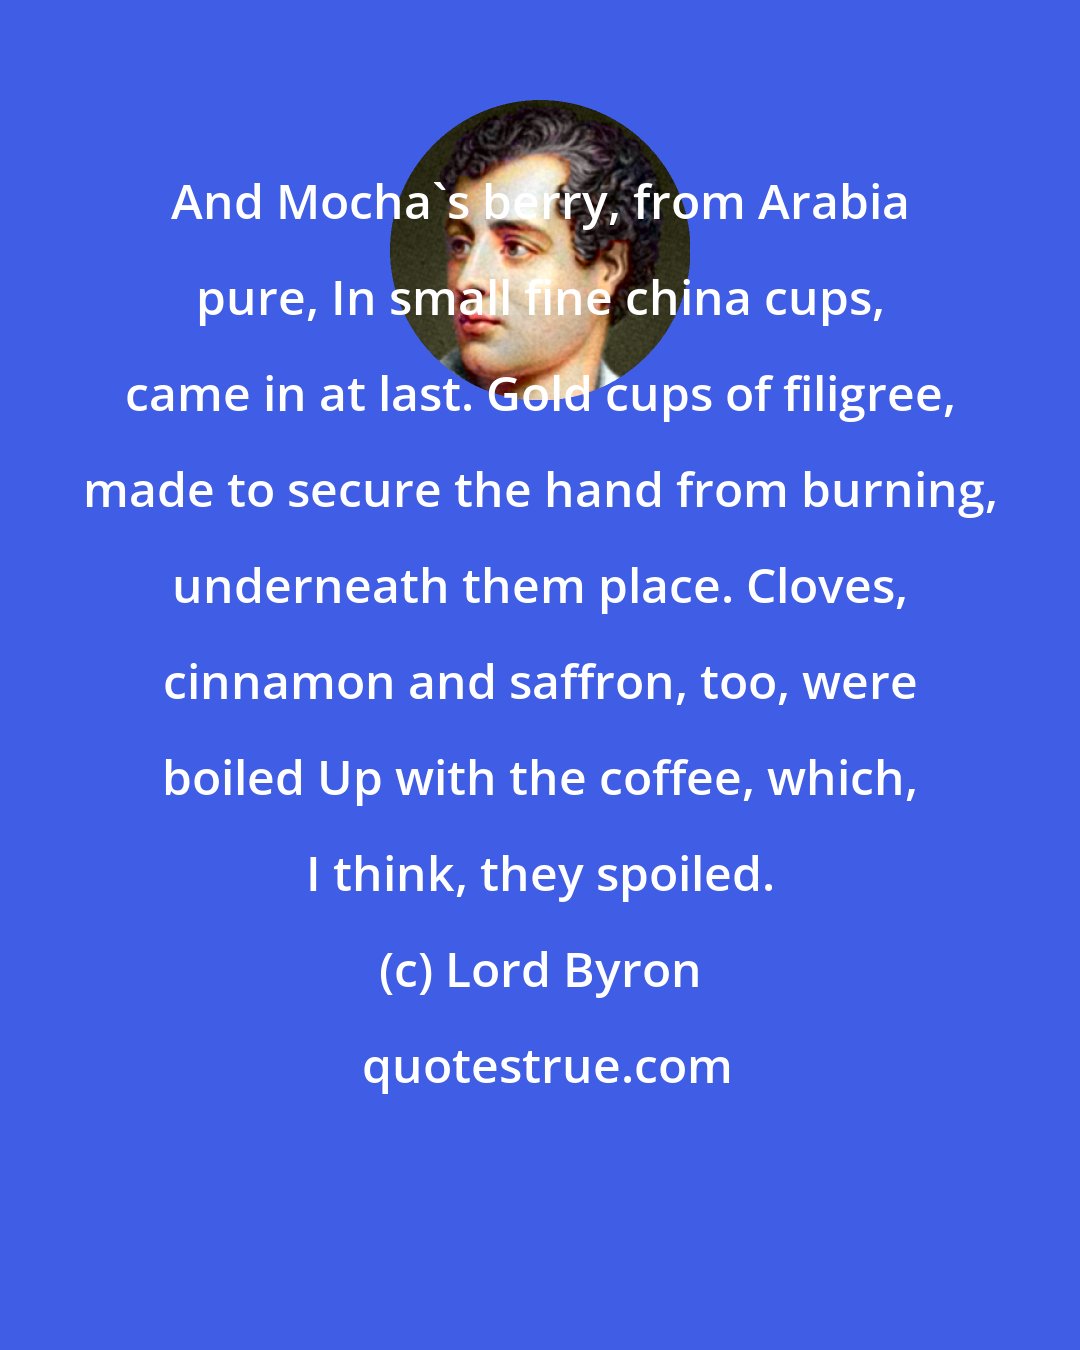 Lord Byron: And Mocha's berry, from Arabia pure, In small fine china cups, came in at last. Gold cups of filigree, made to secure the hand from burning, underneath them place. Cloves, cinnamon and saffron, too, were boiled Up with the coffee, which, I think, they spoiled.